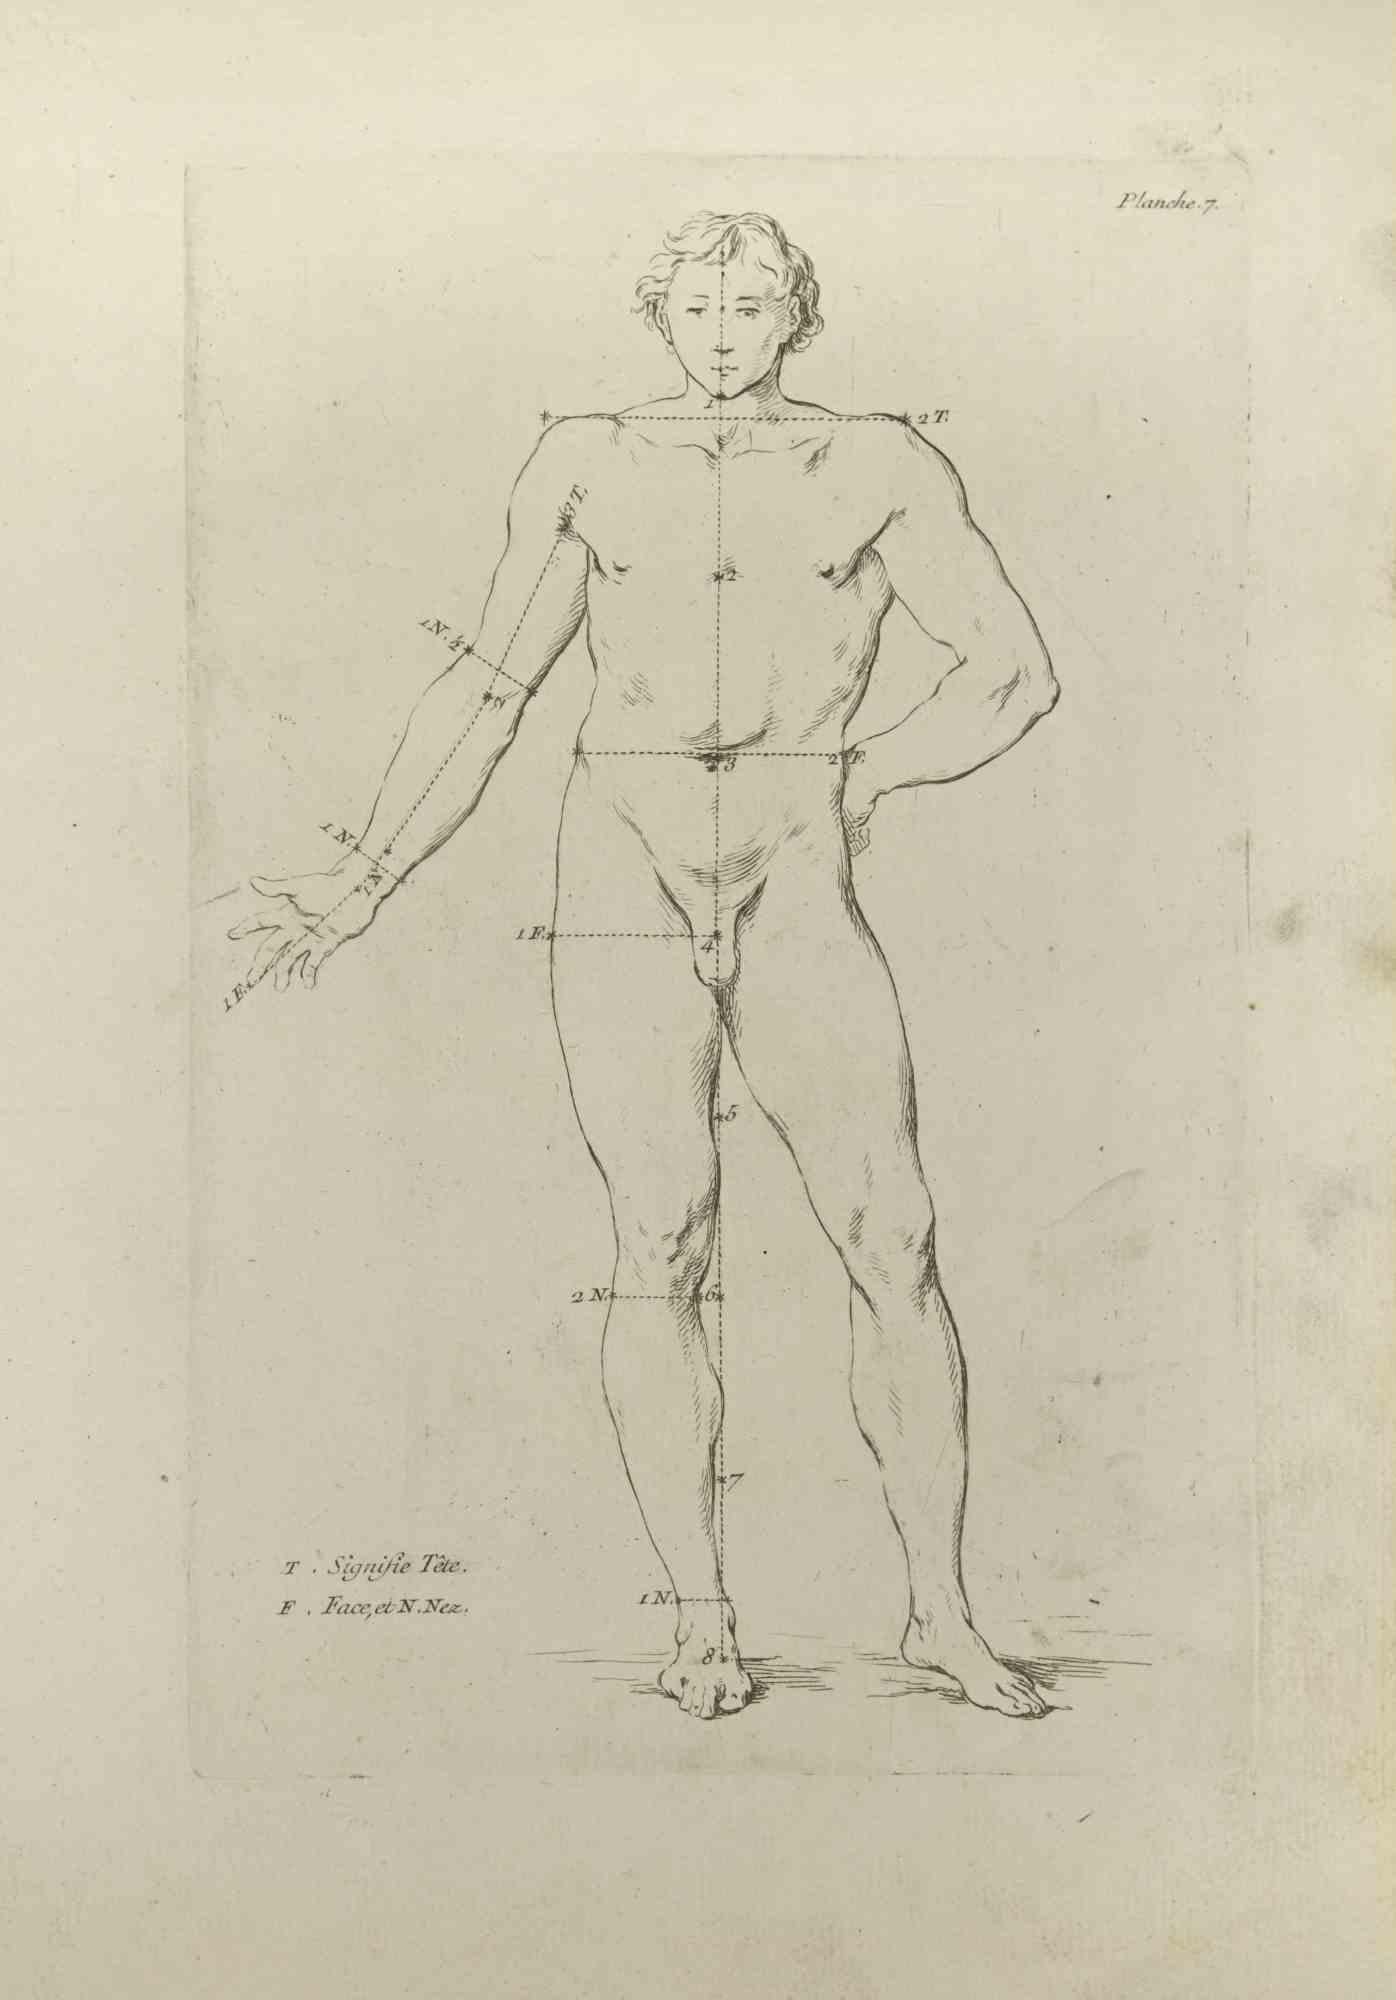 Anatomy Studies is an etching realized by Nicholas Cochin in 1755.

Good conditions with foxing and folding.

The artwork is depicted through confident strokes.

The etching was realized for the anatomy study “JOMBERT, Charles-Antoine (1712-1784) -